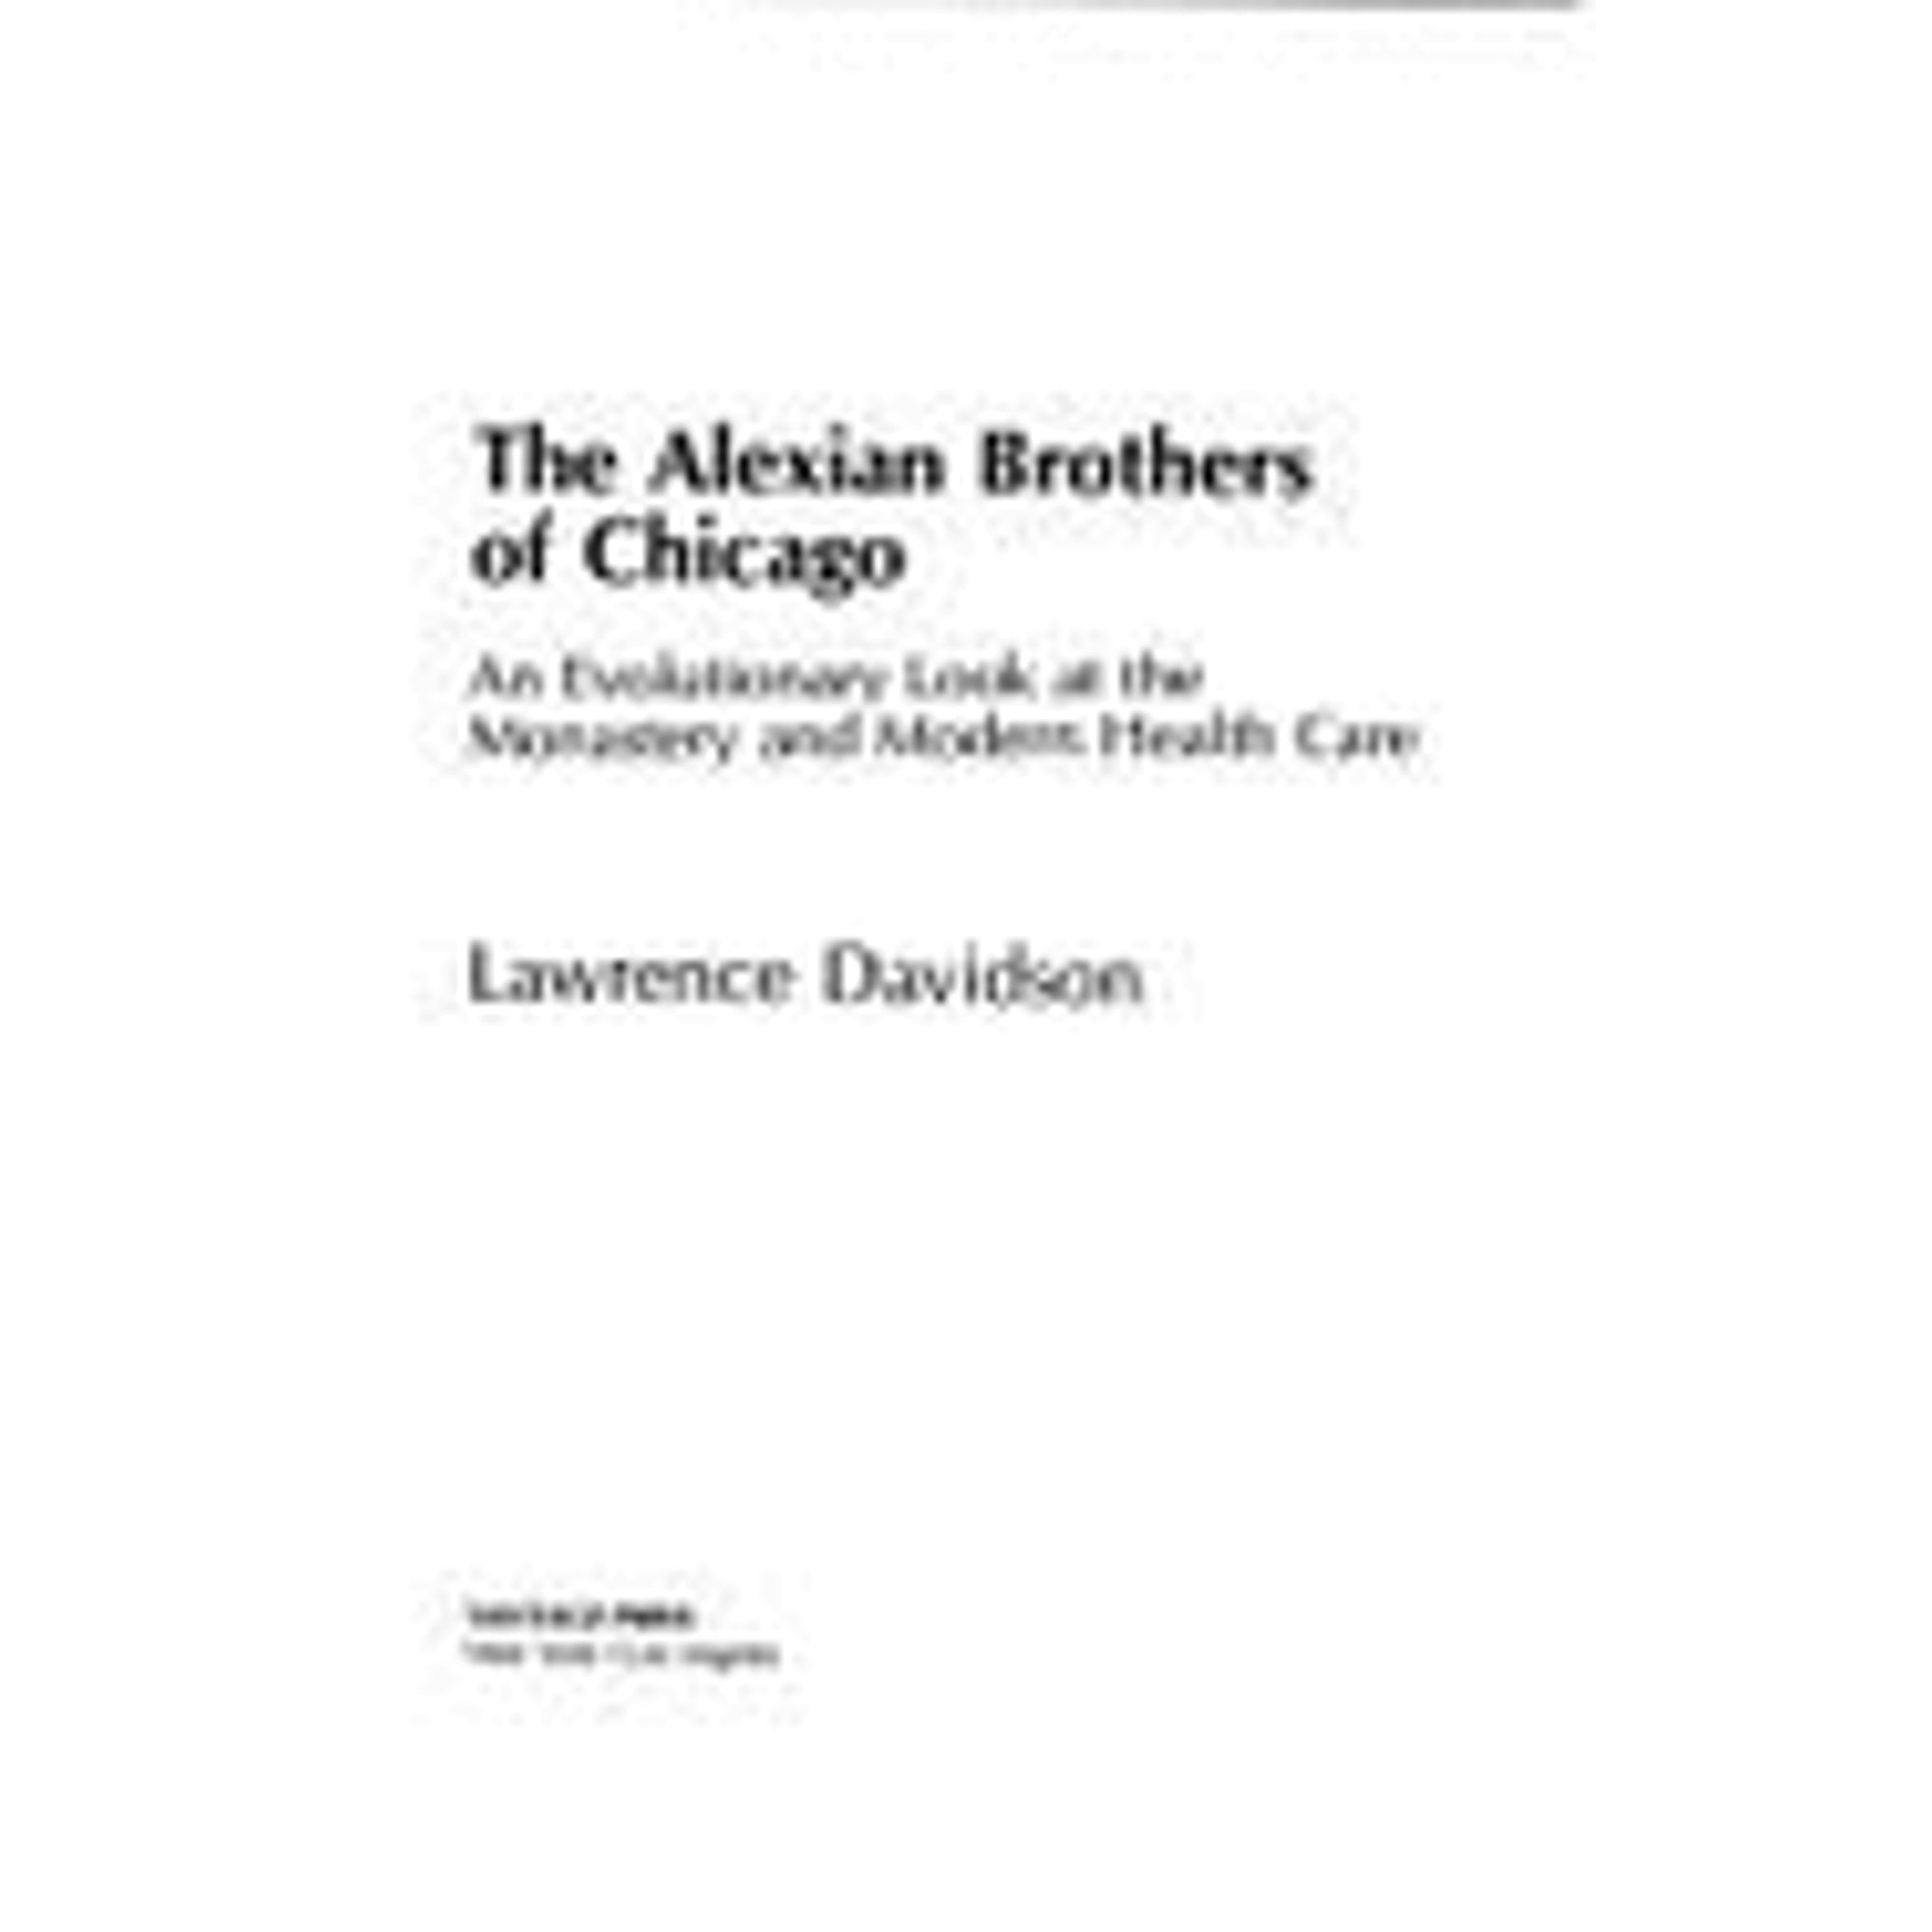 Pre-Owned The Alexian Brothers: An Evolutionary Look at the Monastery & Modern Health Care (Hardcover 9780533086894) by Lawrence Davidson